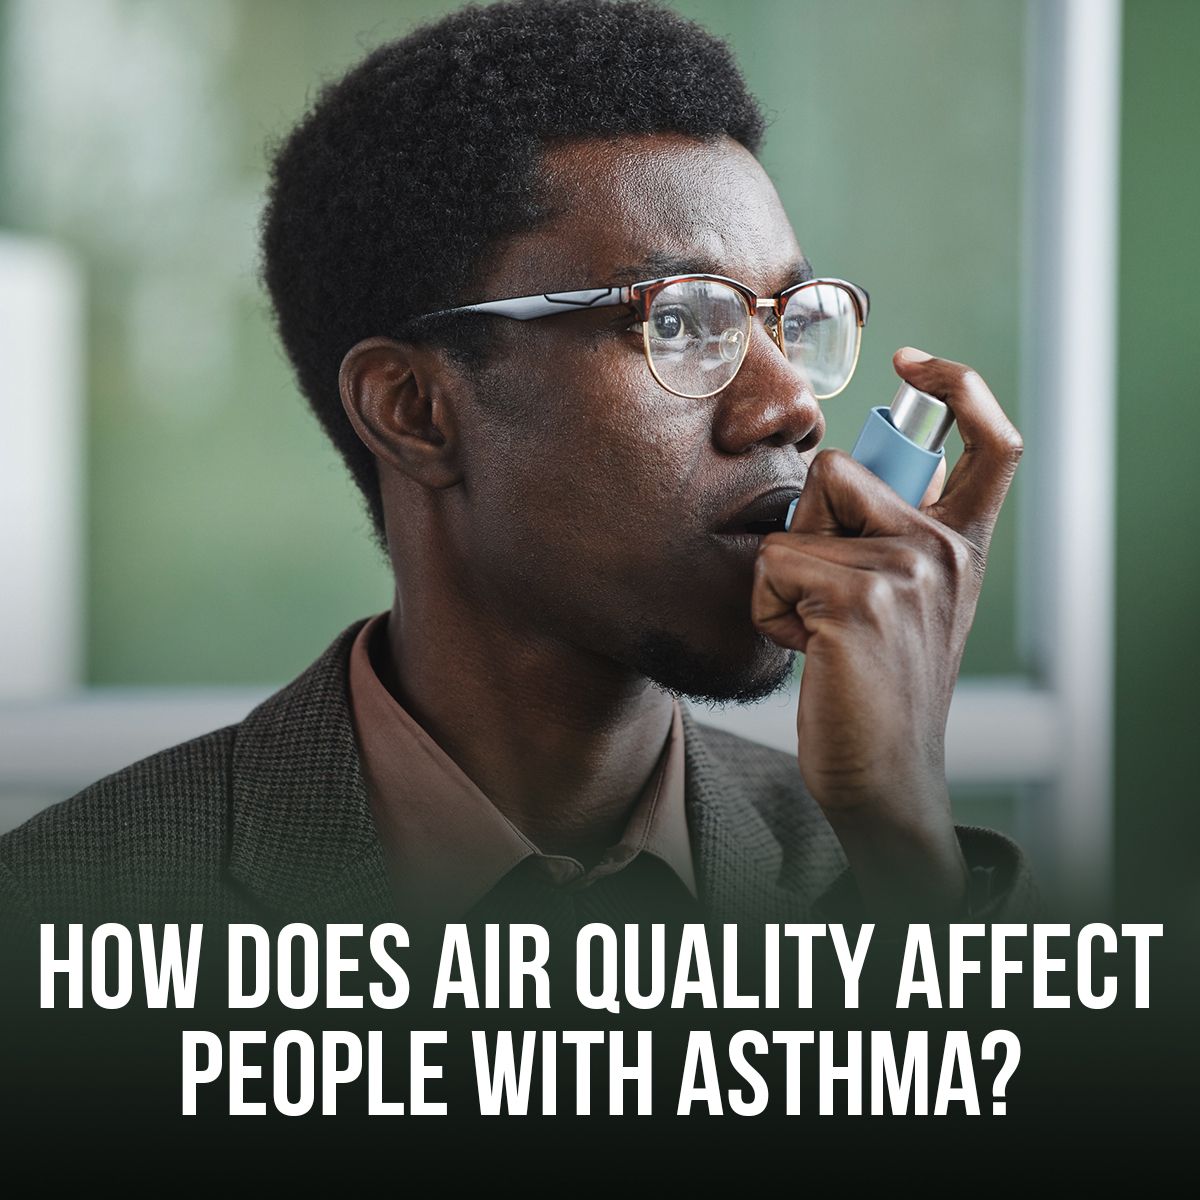 How Does Air Quality Affect People With Asthma?